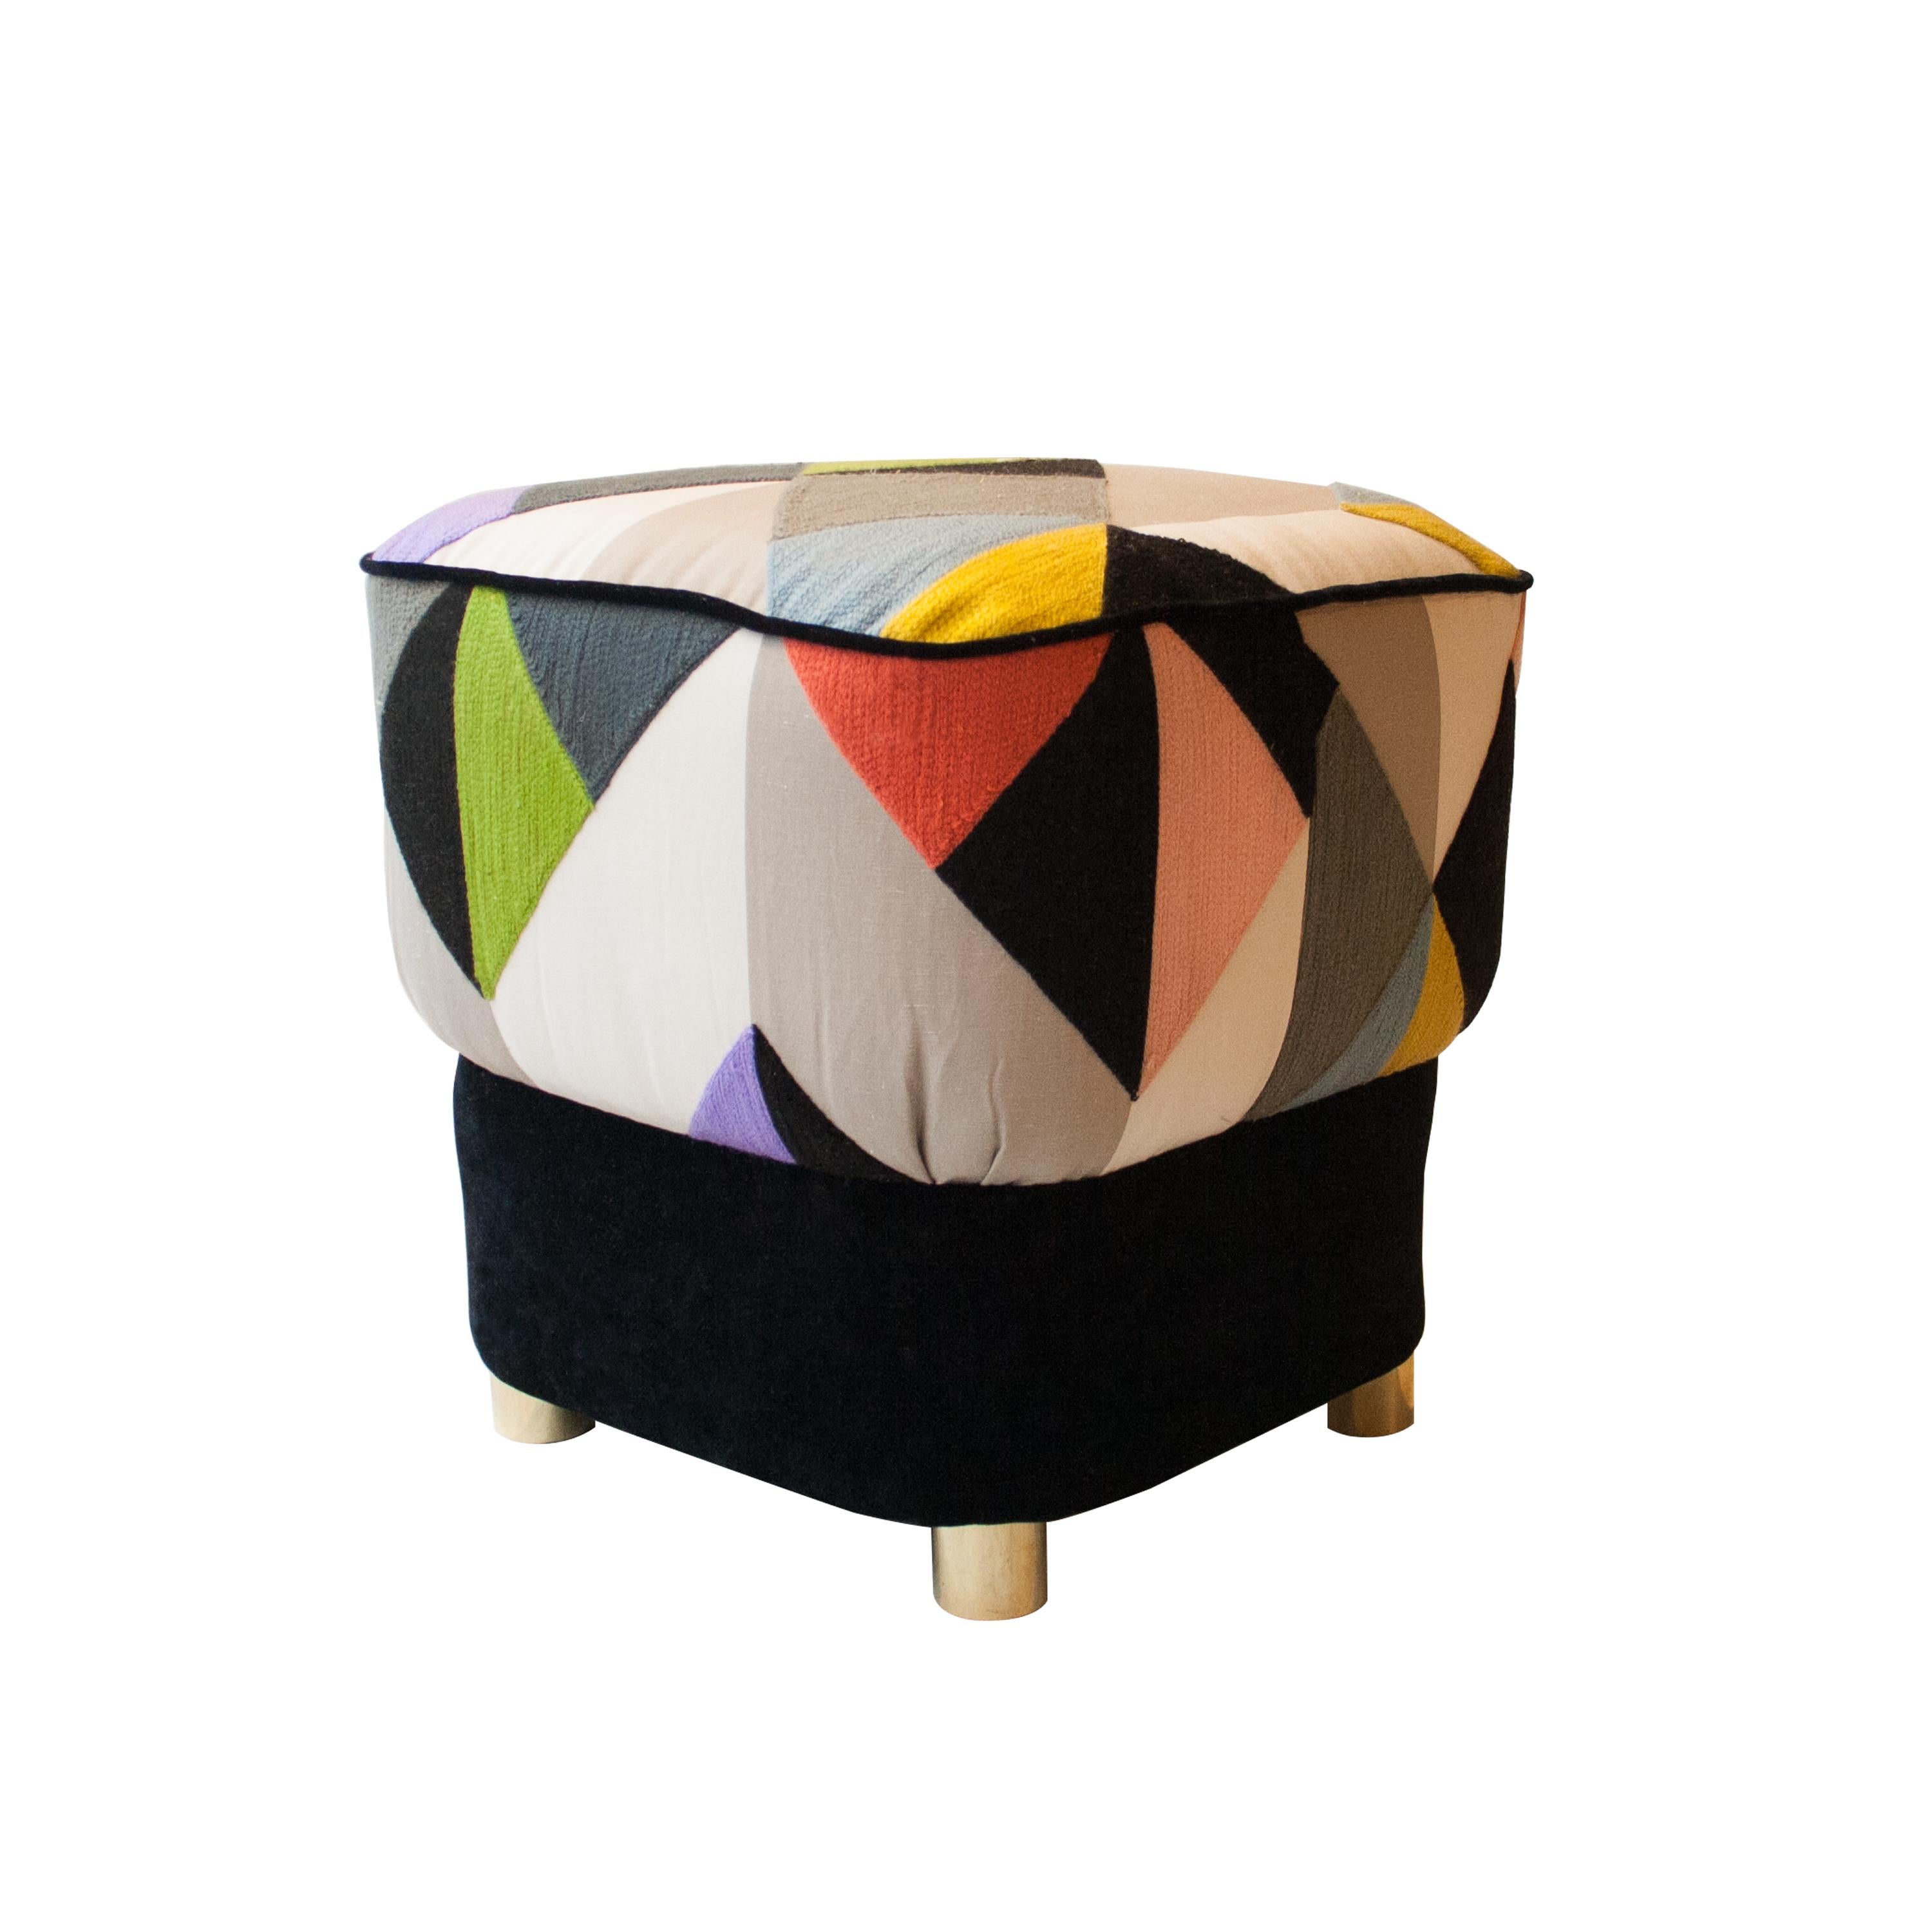 Square, made of solid wood structure pouf whit Linen/wool upholstery with geometric embroidery by Pierre Frey. Finished in brass legs.

  